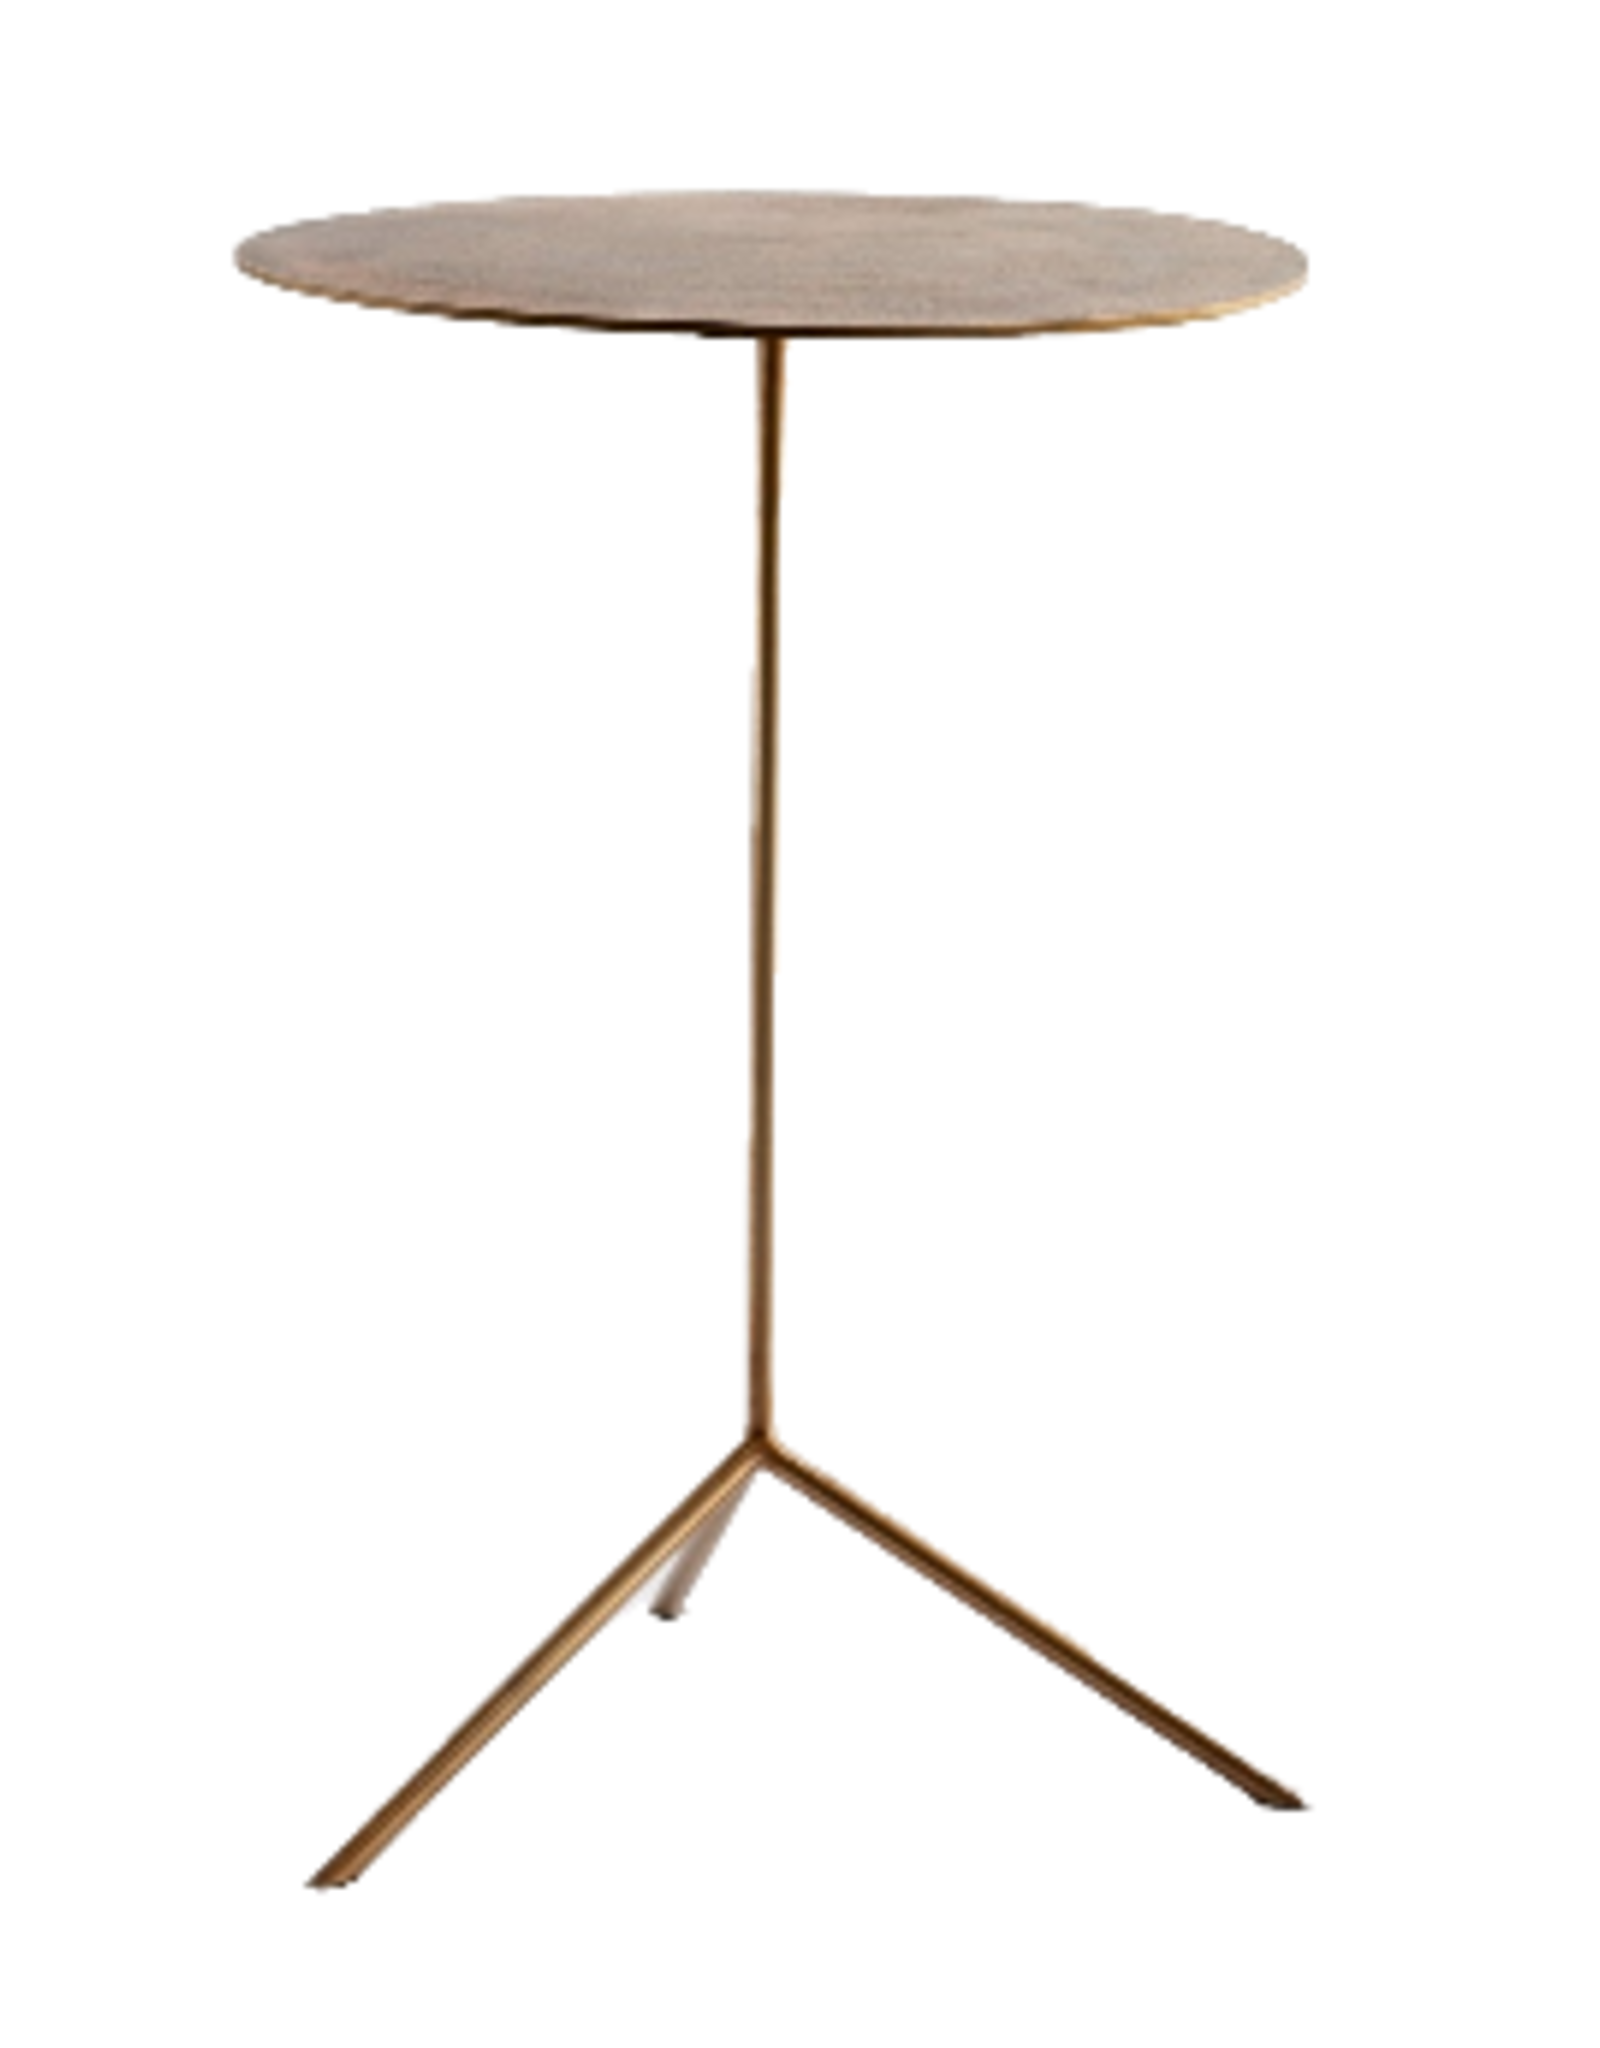 Large Aluminum and Brass Tripod Side Table